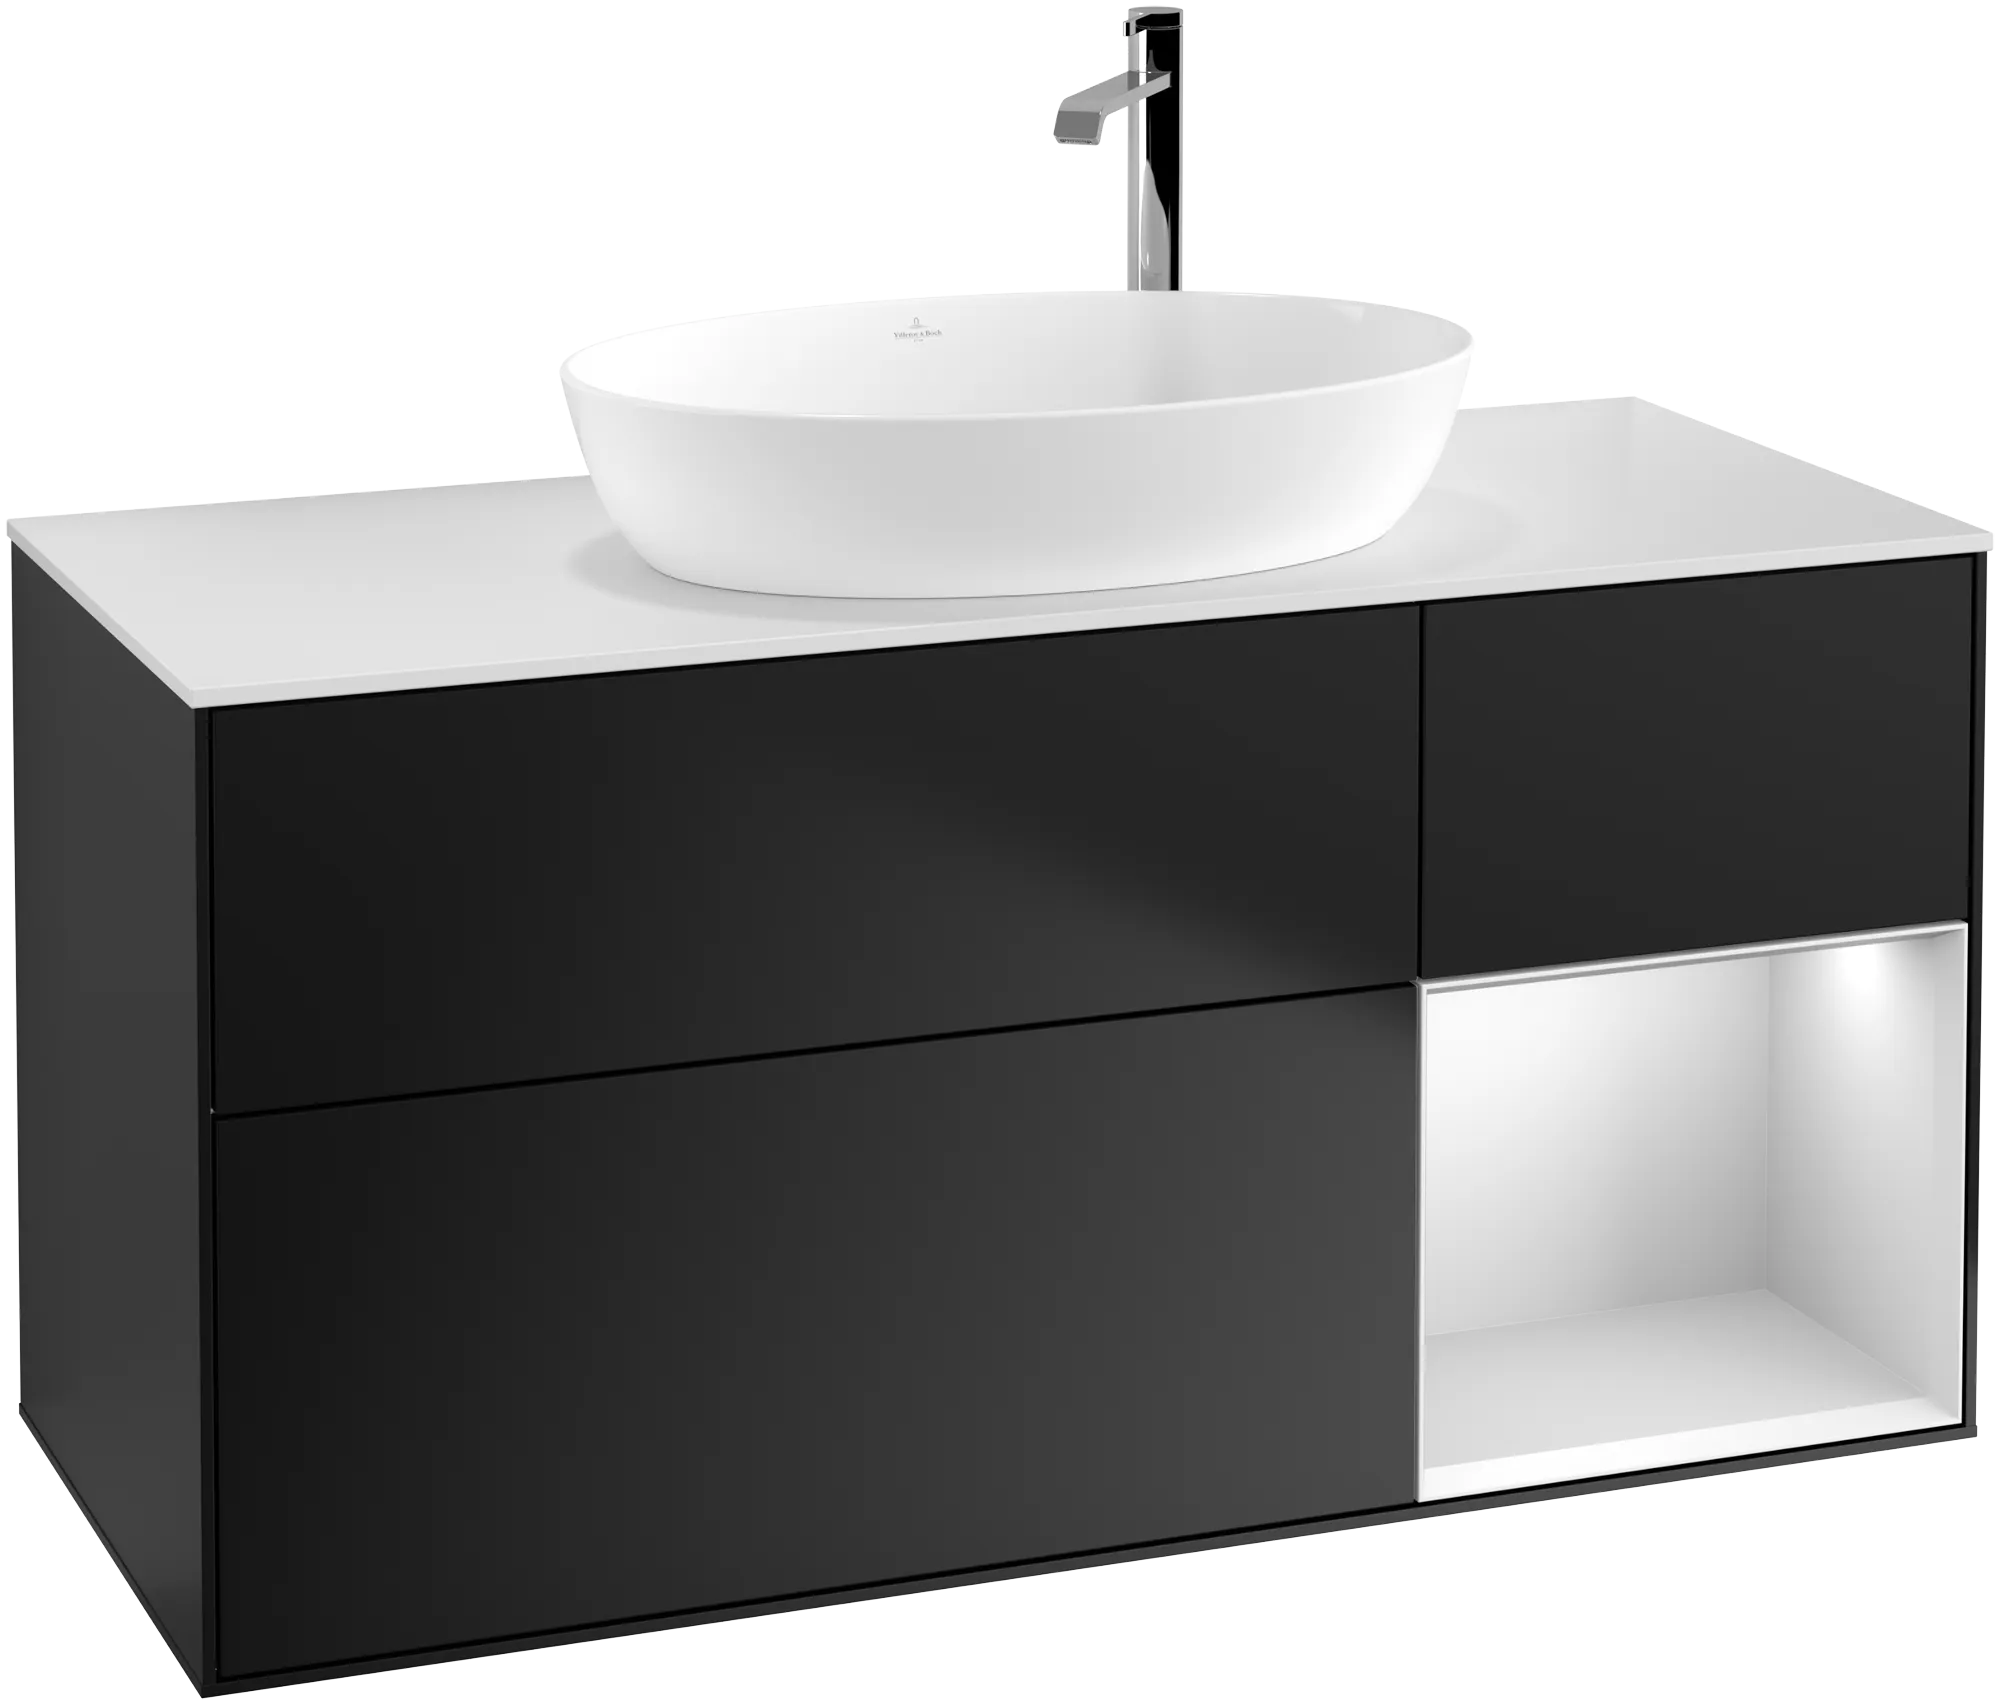 Picture of VILLEROY BOCH Finion Vanity unit, with lighting, 3 pull-out compartments, 1200 x 603 x 501 mm, Black Matt Lacquer / White Matt Lacquer / Glass White Matt #G951MTPD